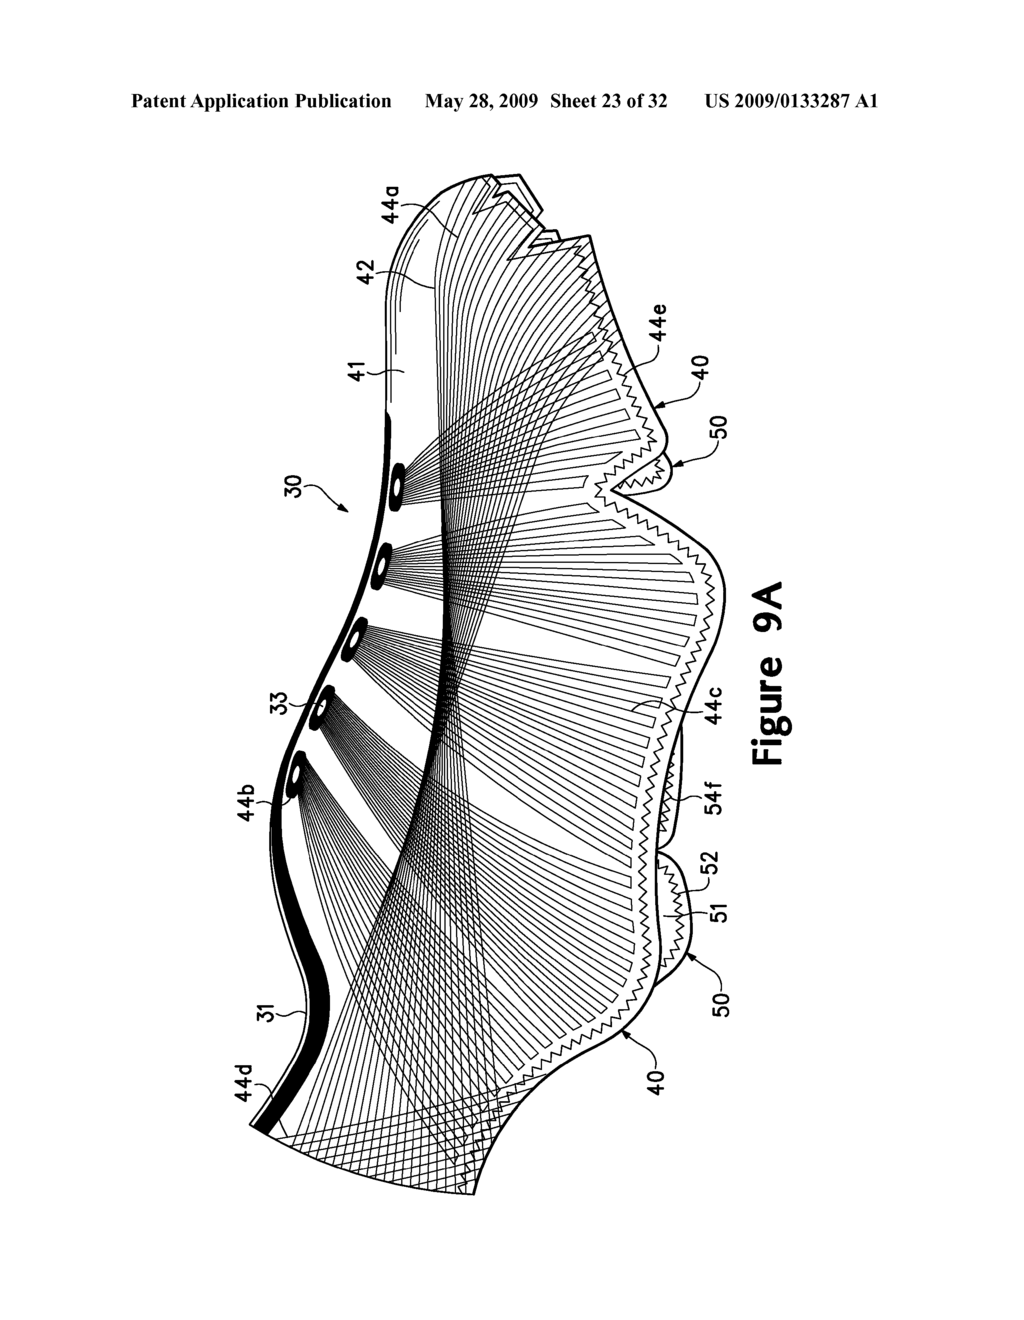 Article Of Footwear Having An Upper With Thread Structural Elements - diagram, schematic, and image 24